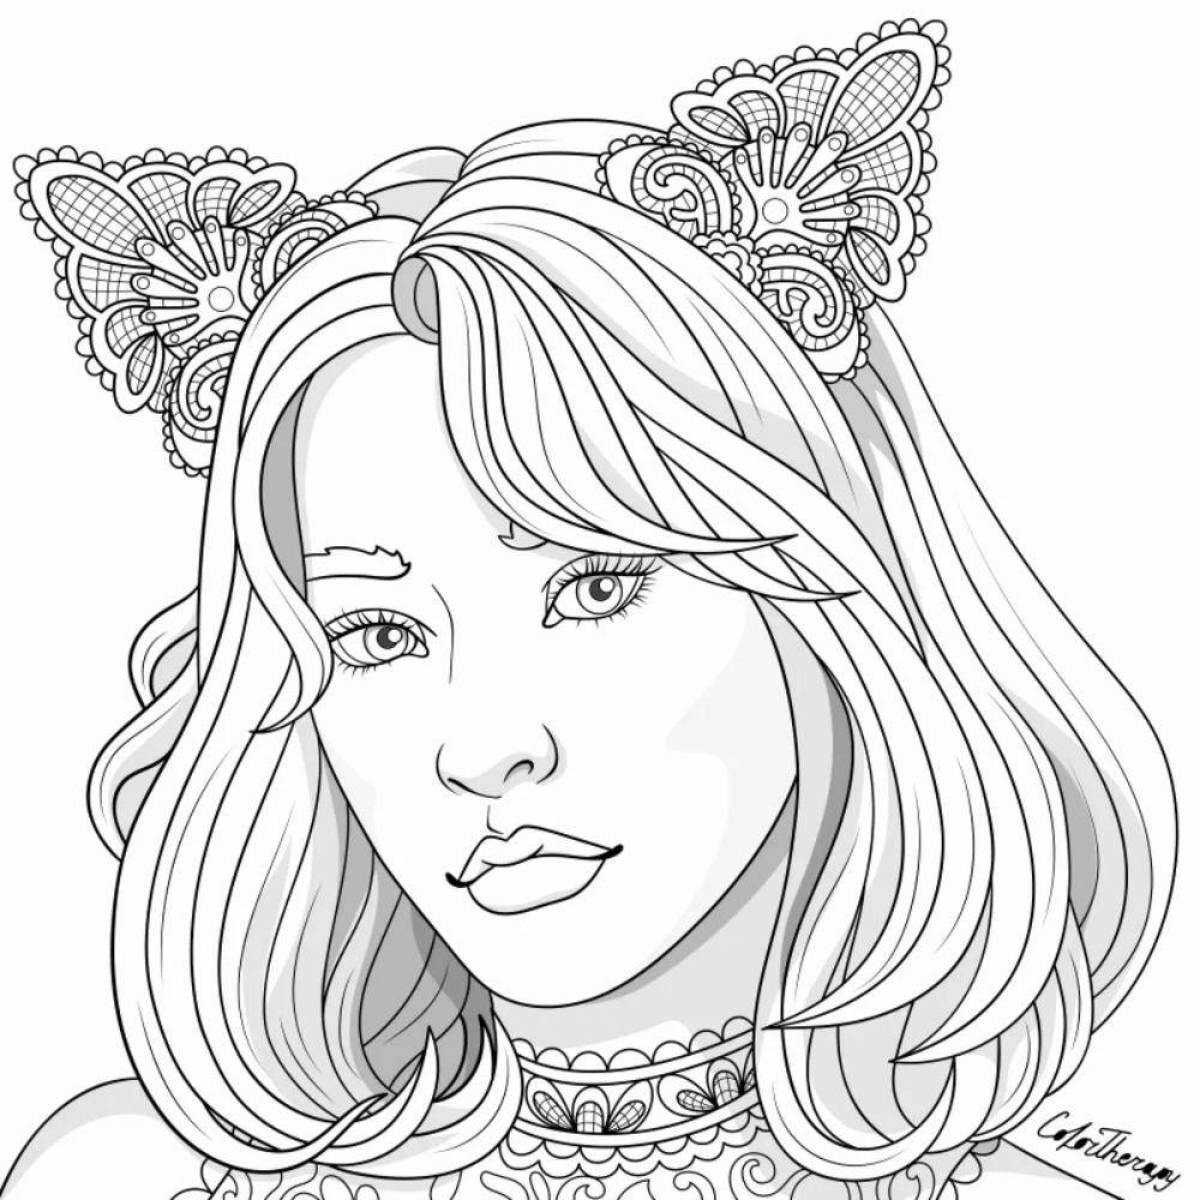 Amazing coloring book for girls 8 years old